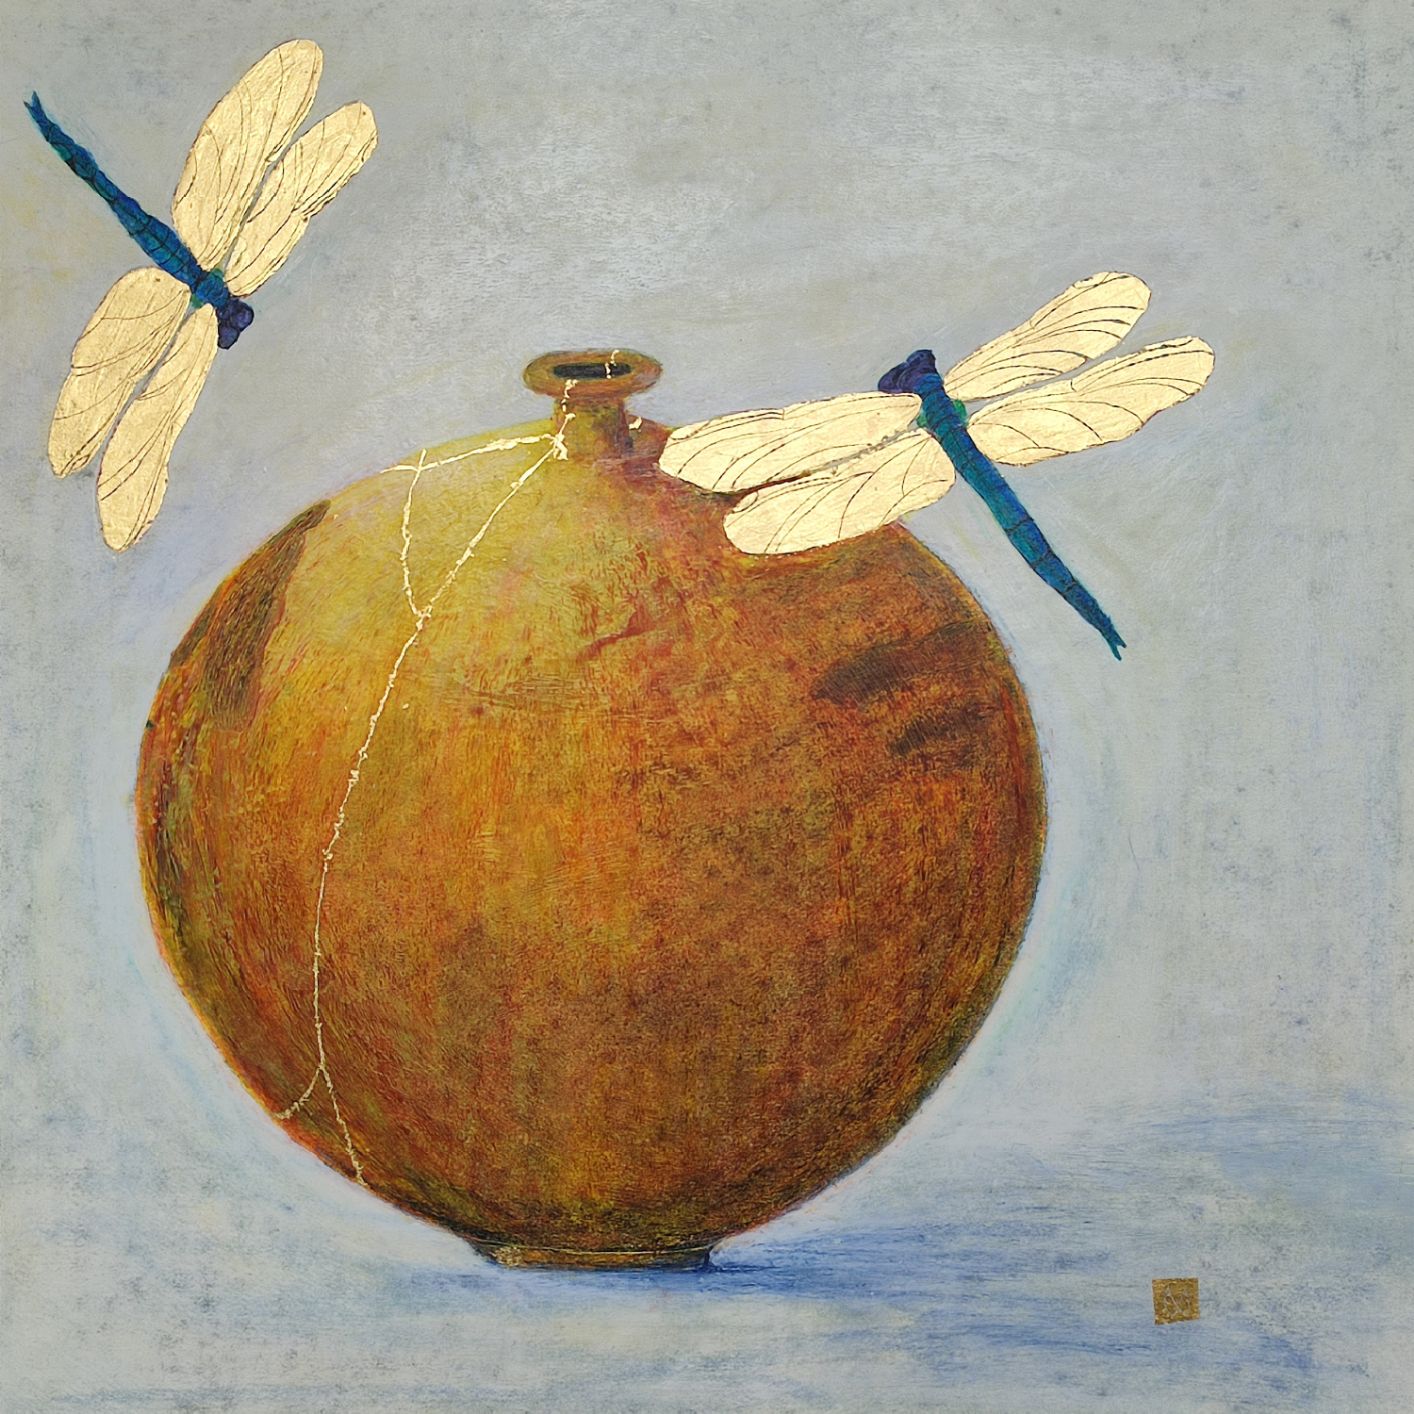 Painting of an amber coloured kintsugi vessel with two dragonflies